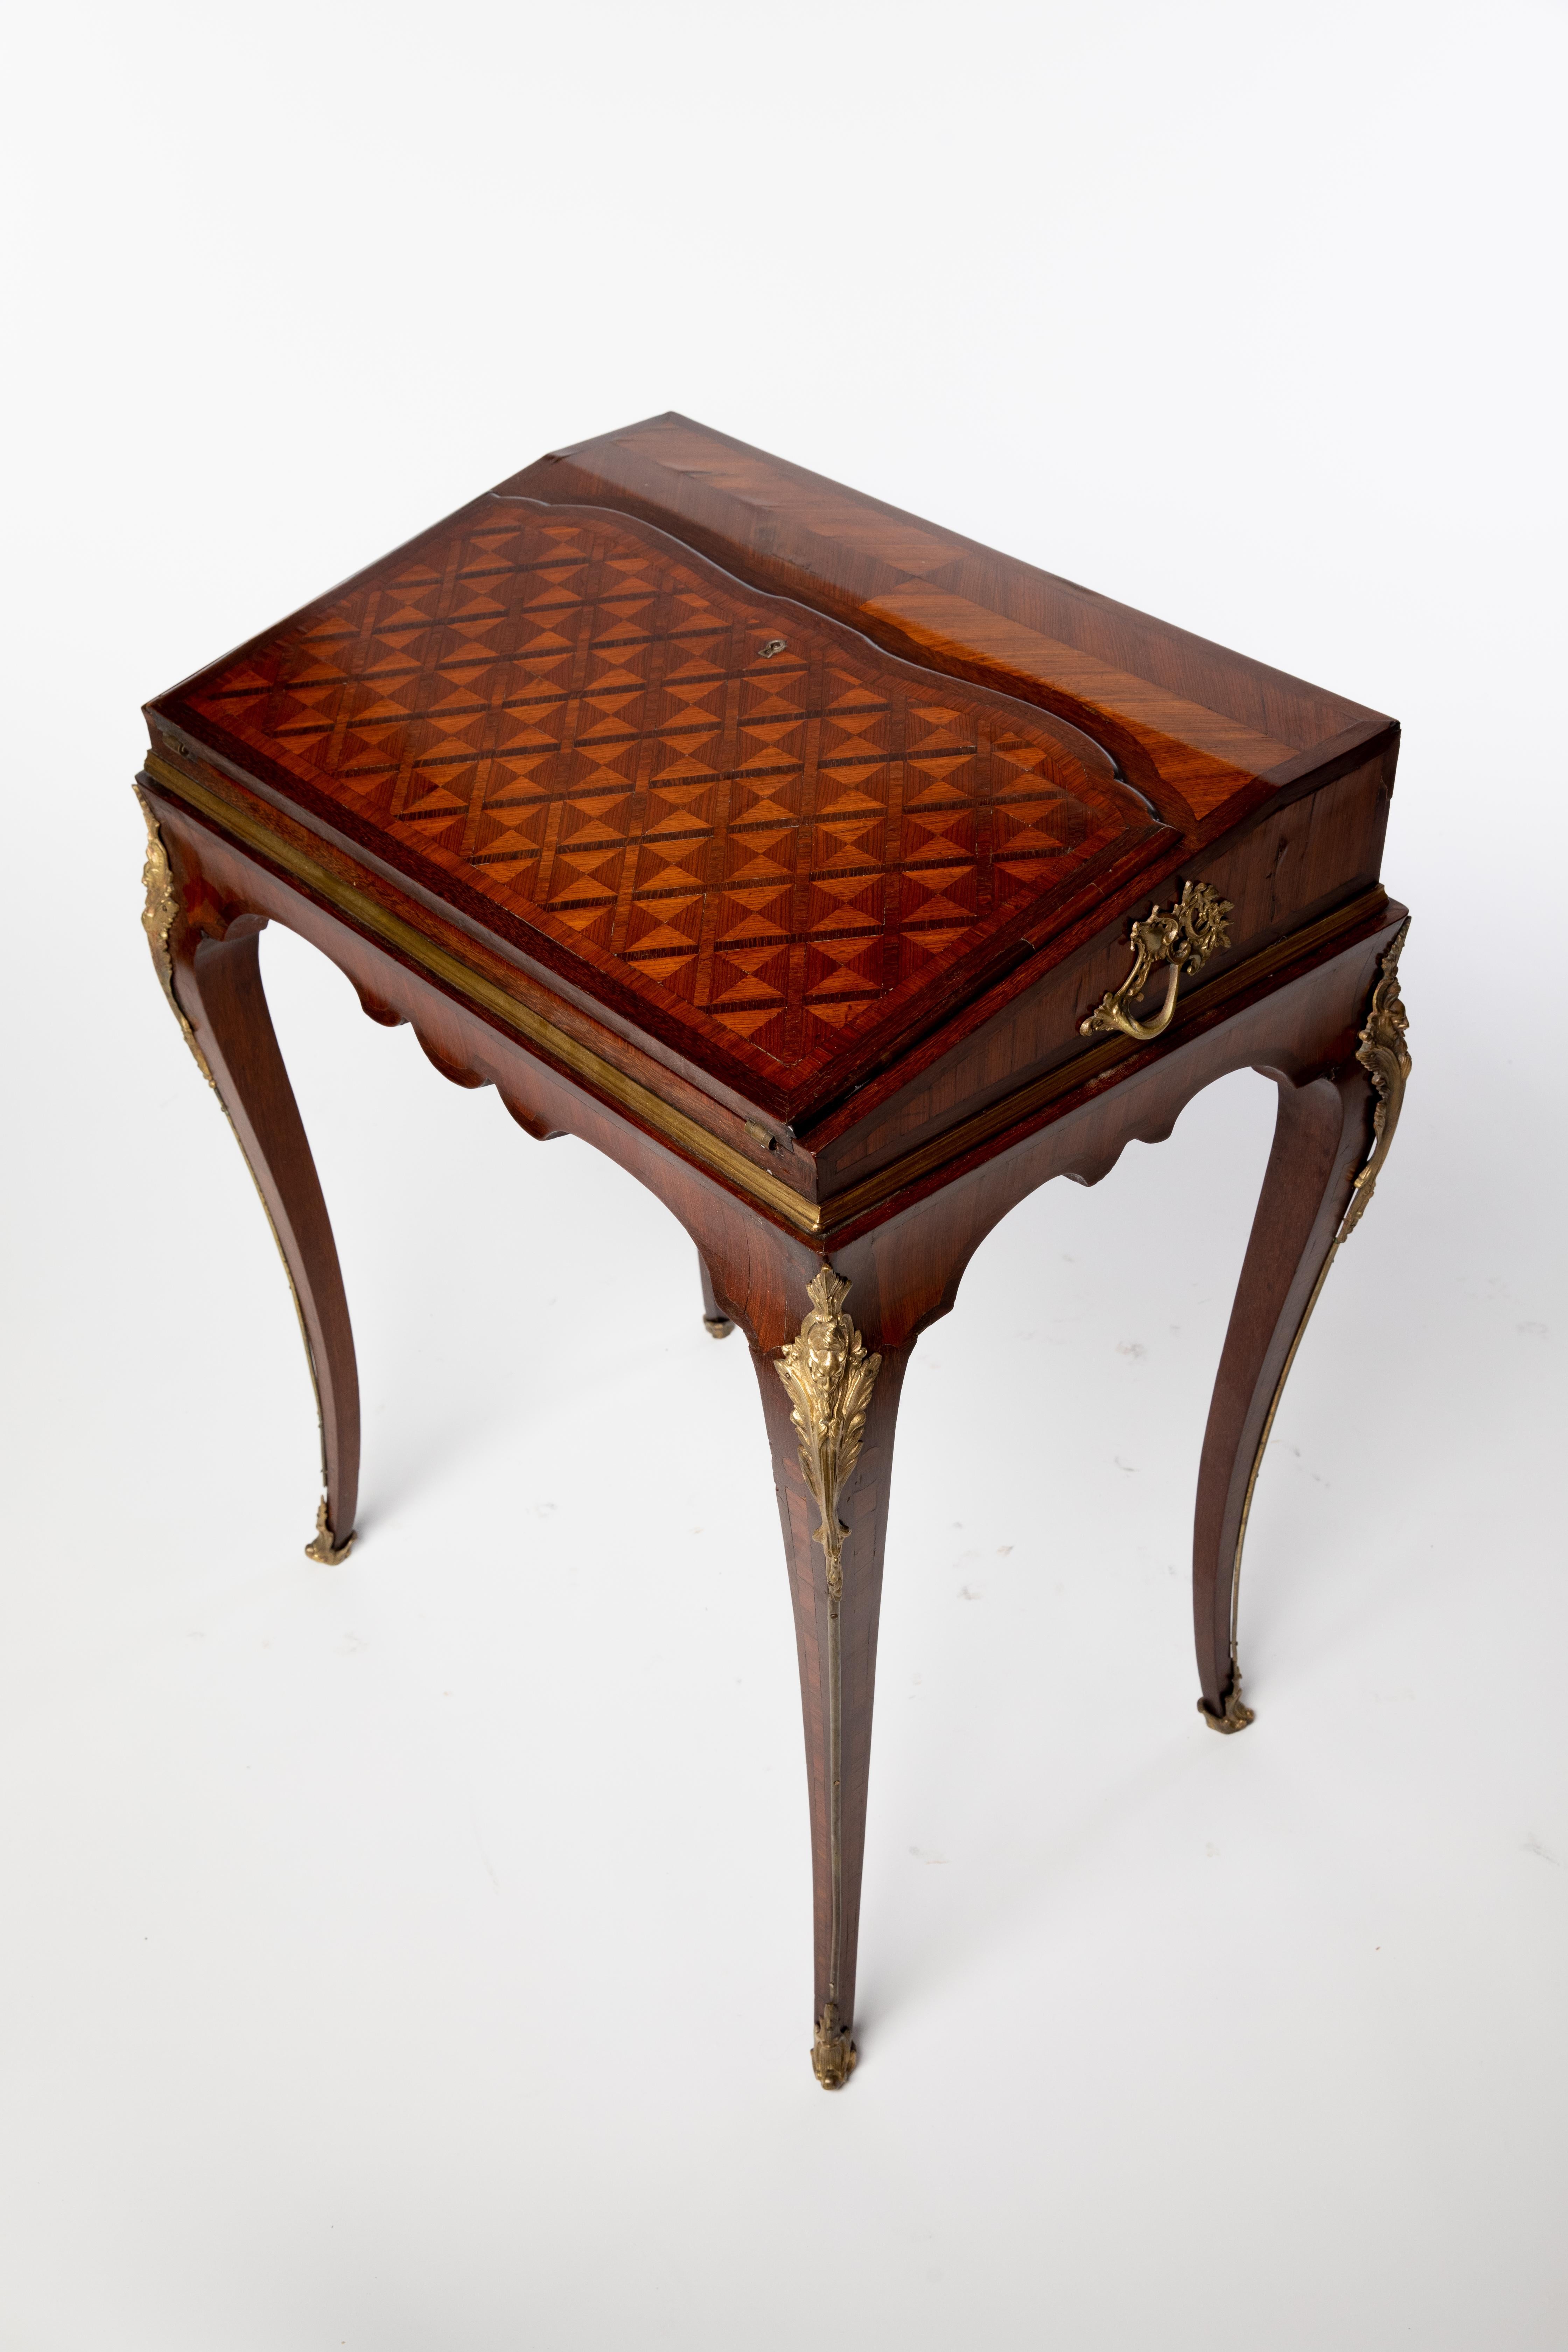 Elegant French ladies writing table, or desk made in the Louis XVI style.